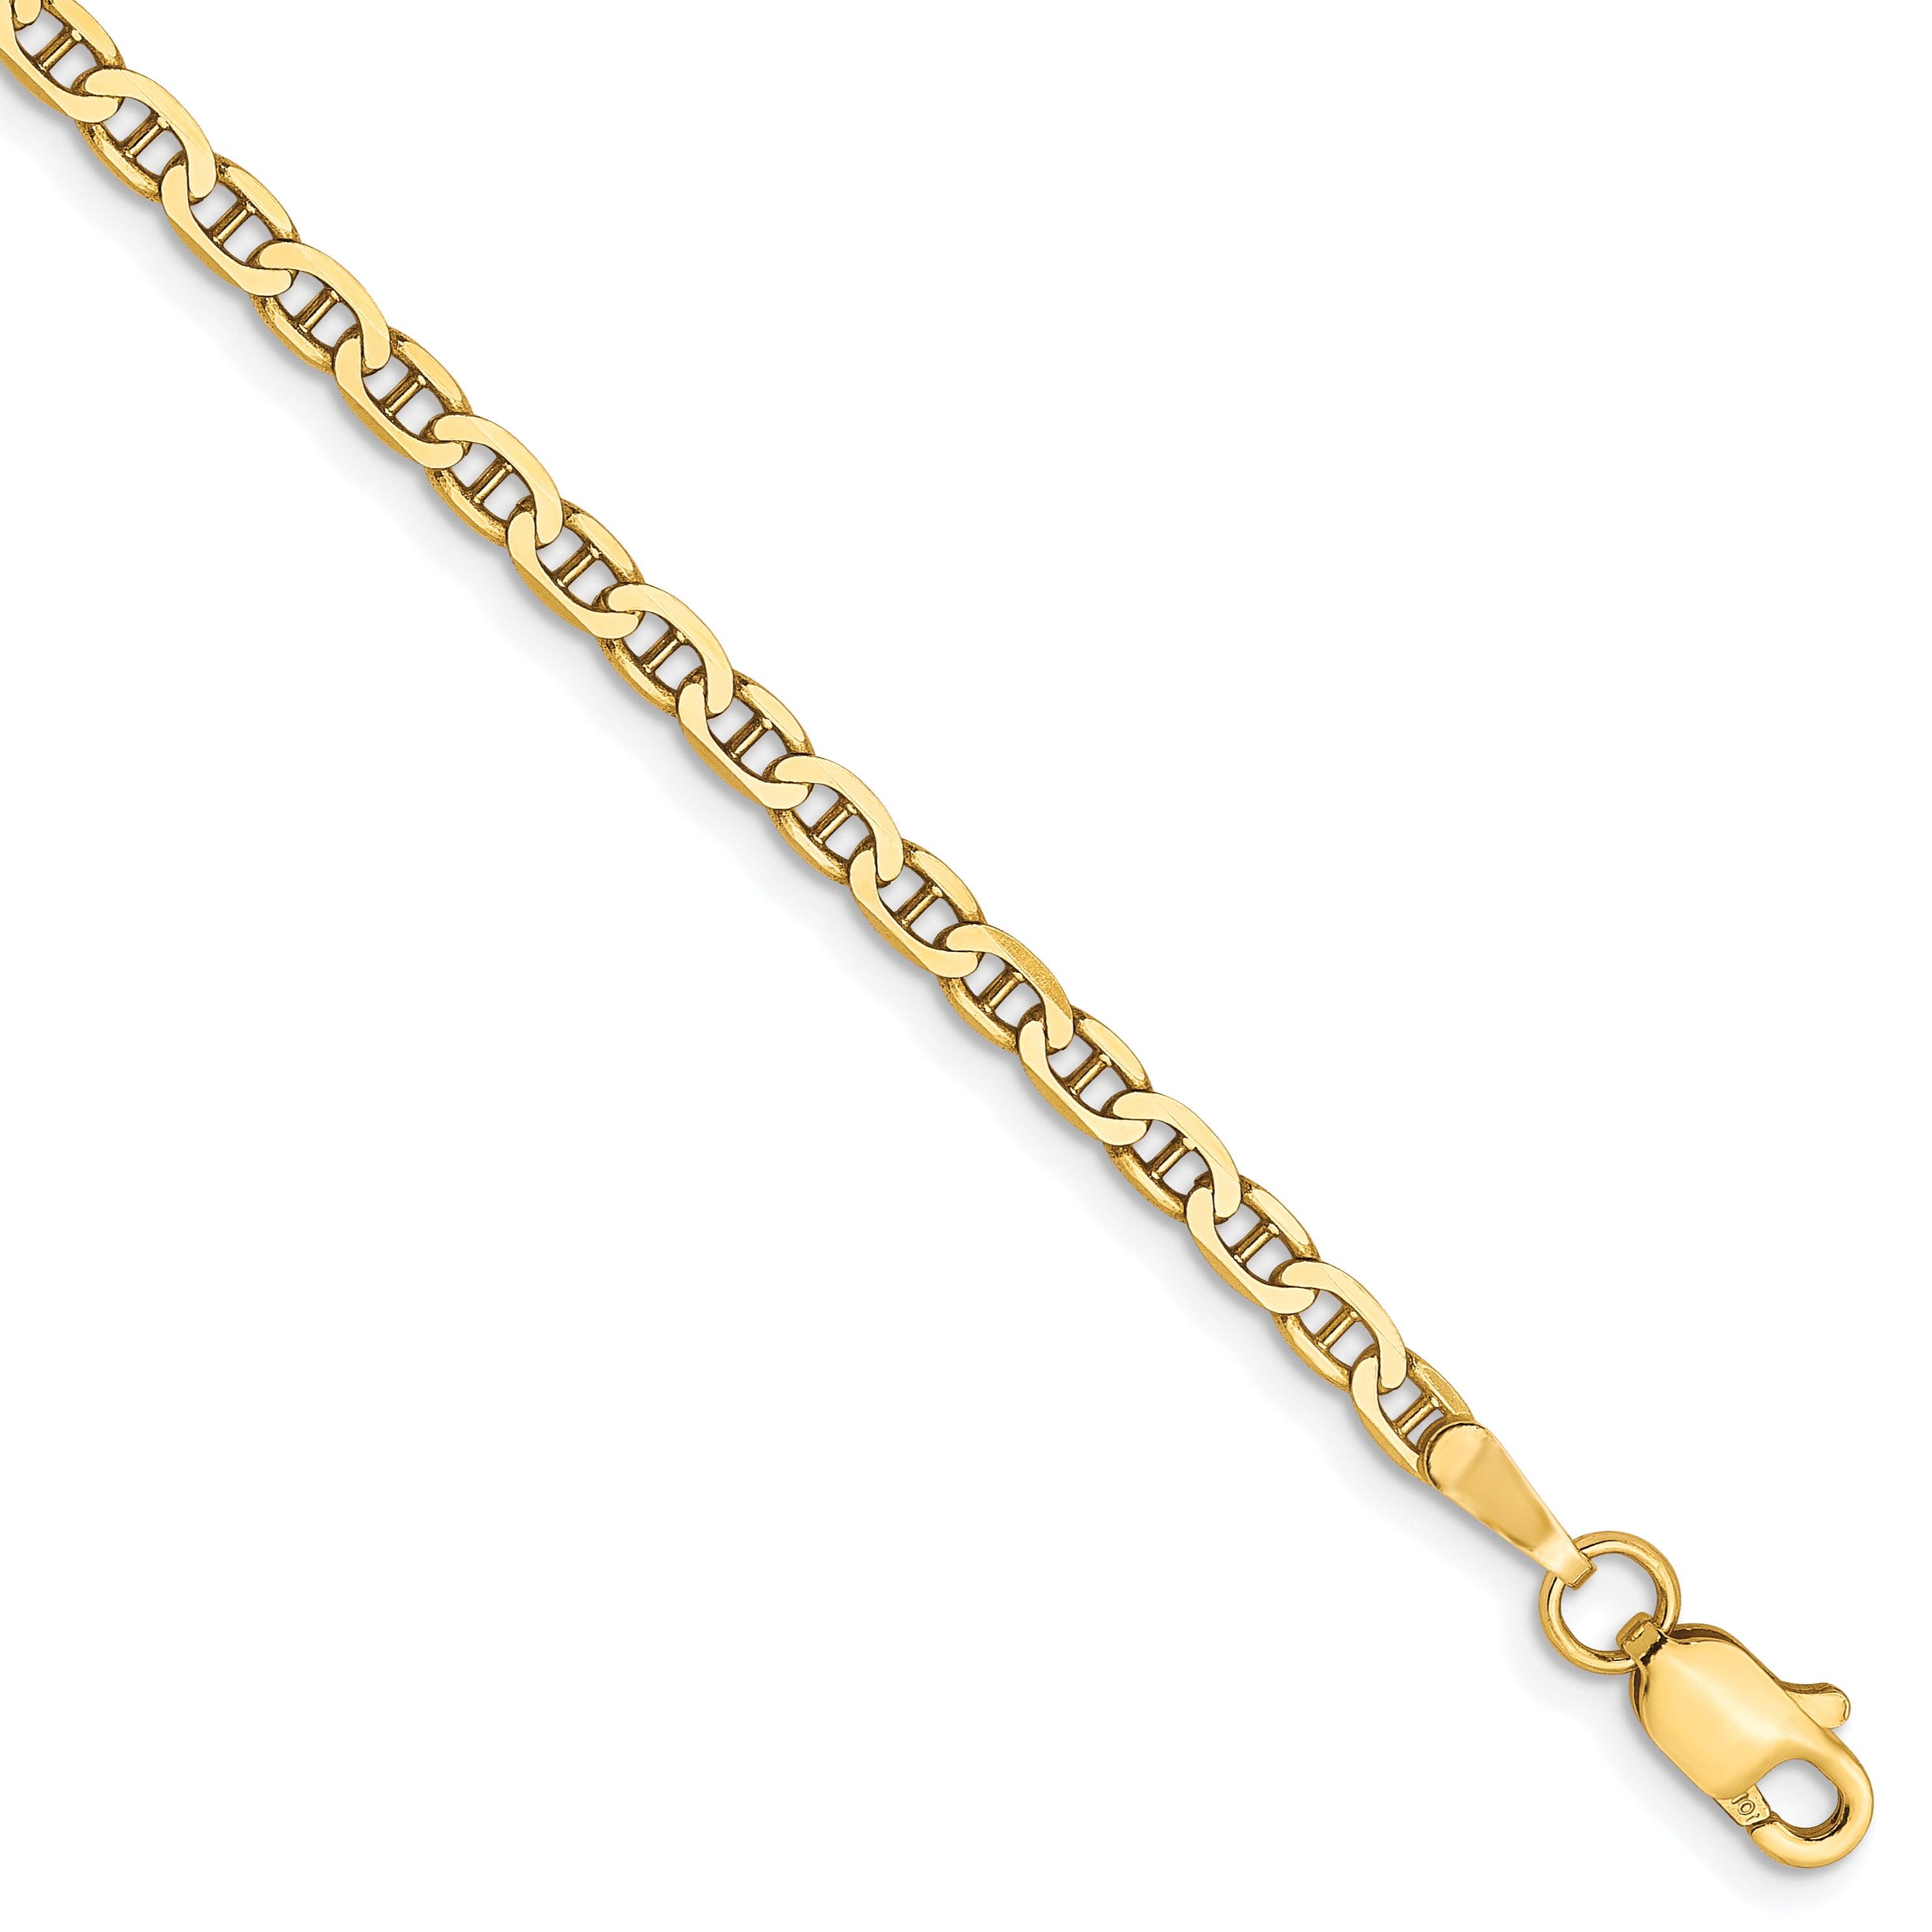 10K 2.4mm Flat Anchor Chain Anklet